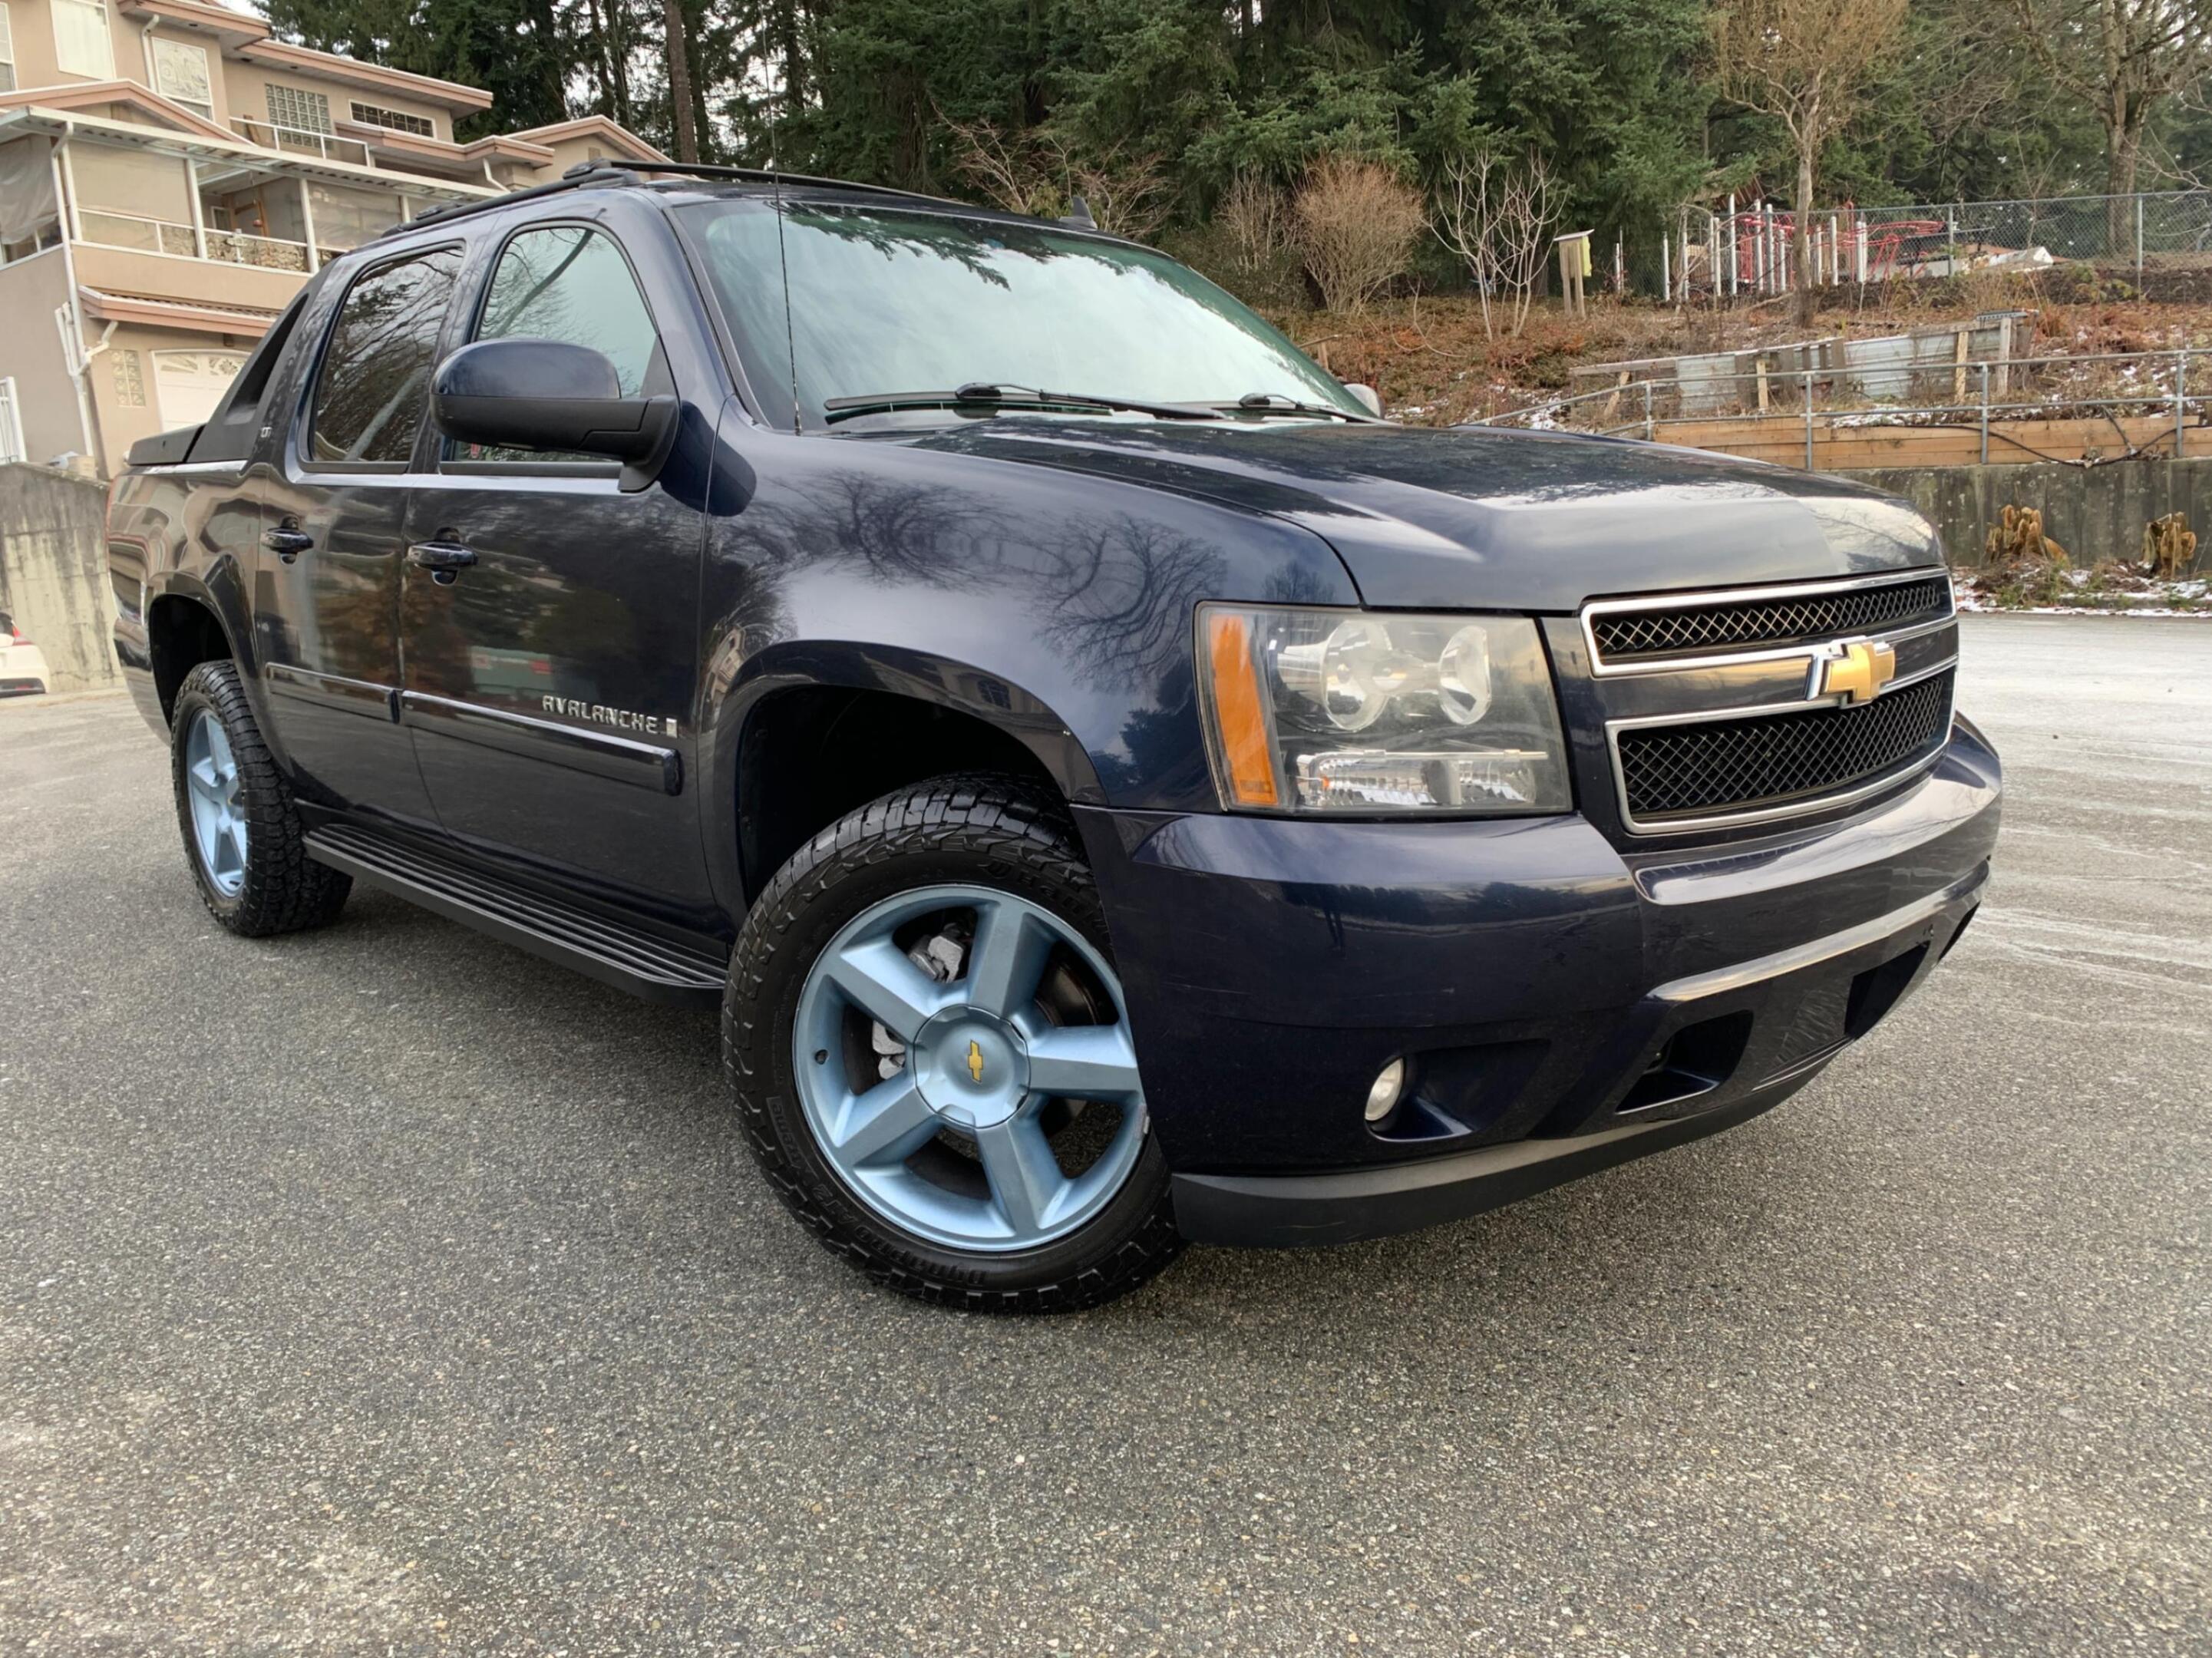 2009 Chevrolet Avalanche 1500 Crew Cab/4X4/Leather/Sunroof